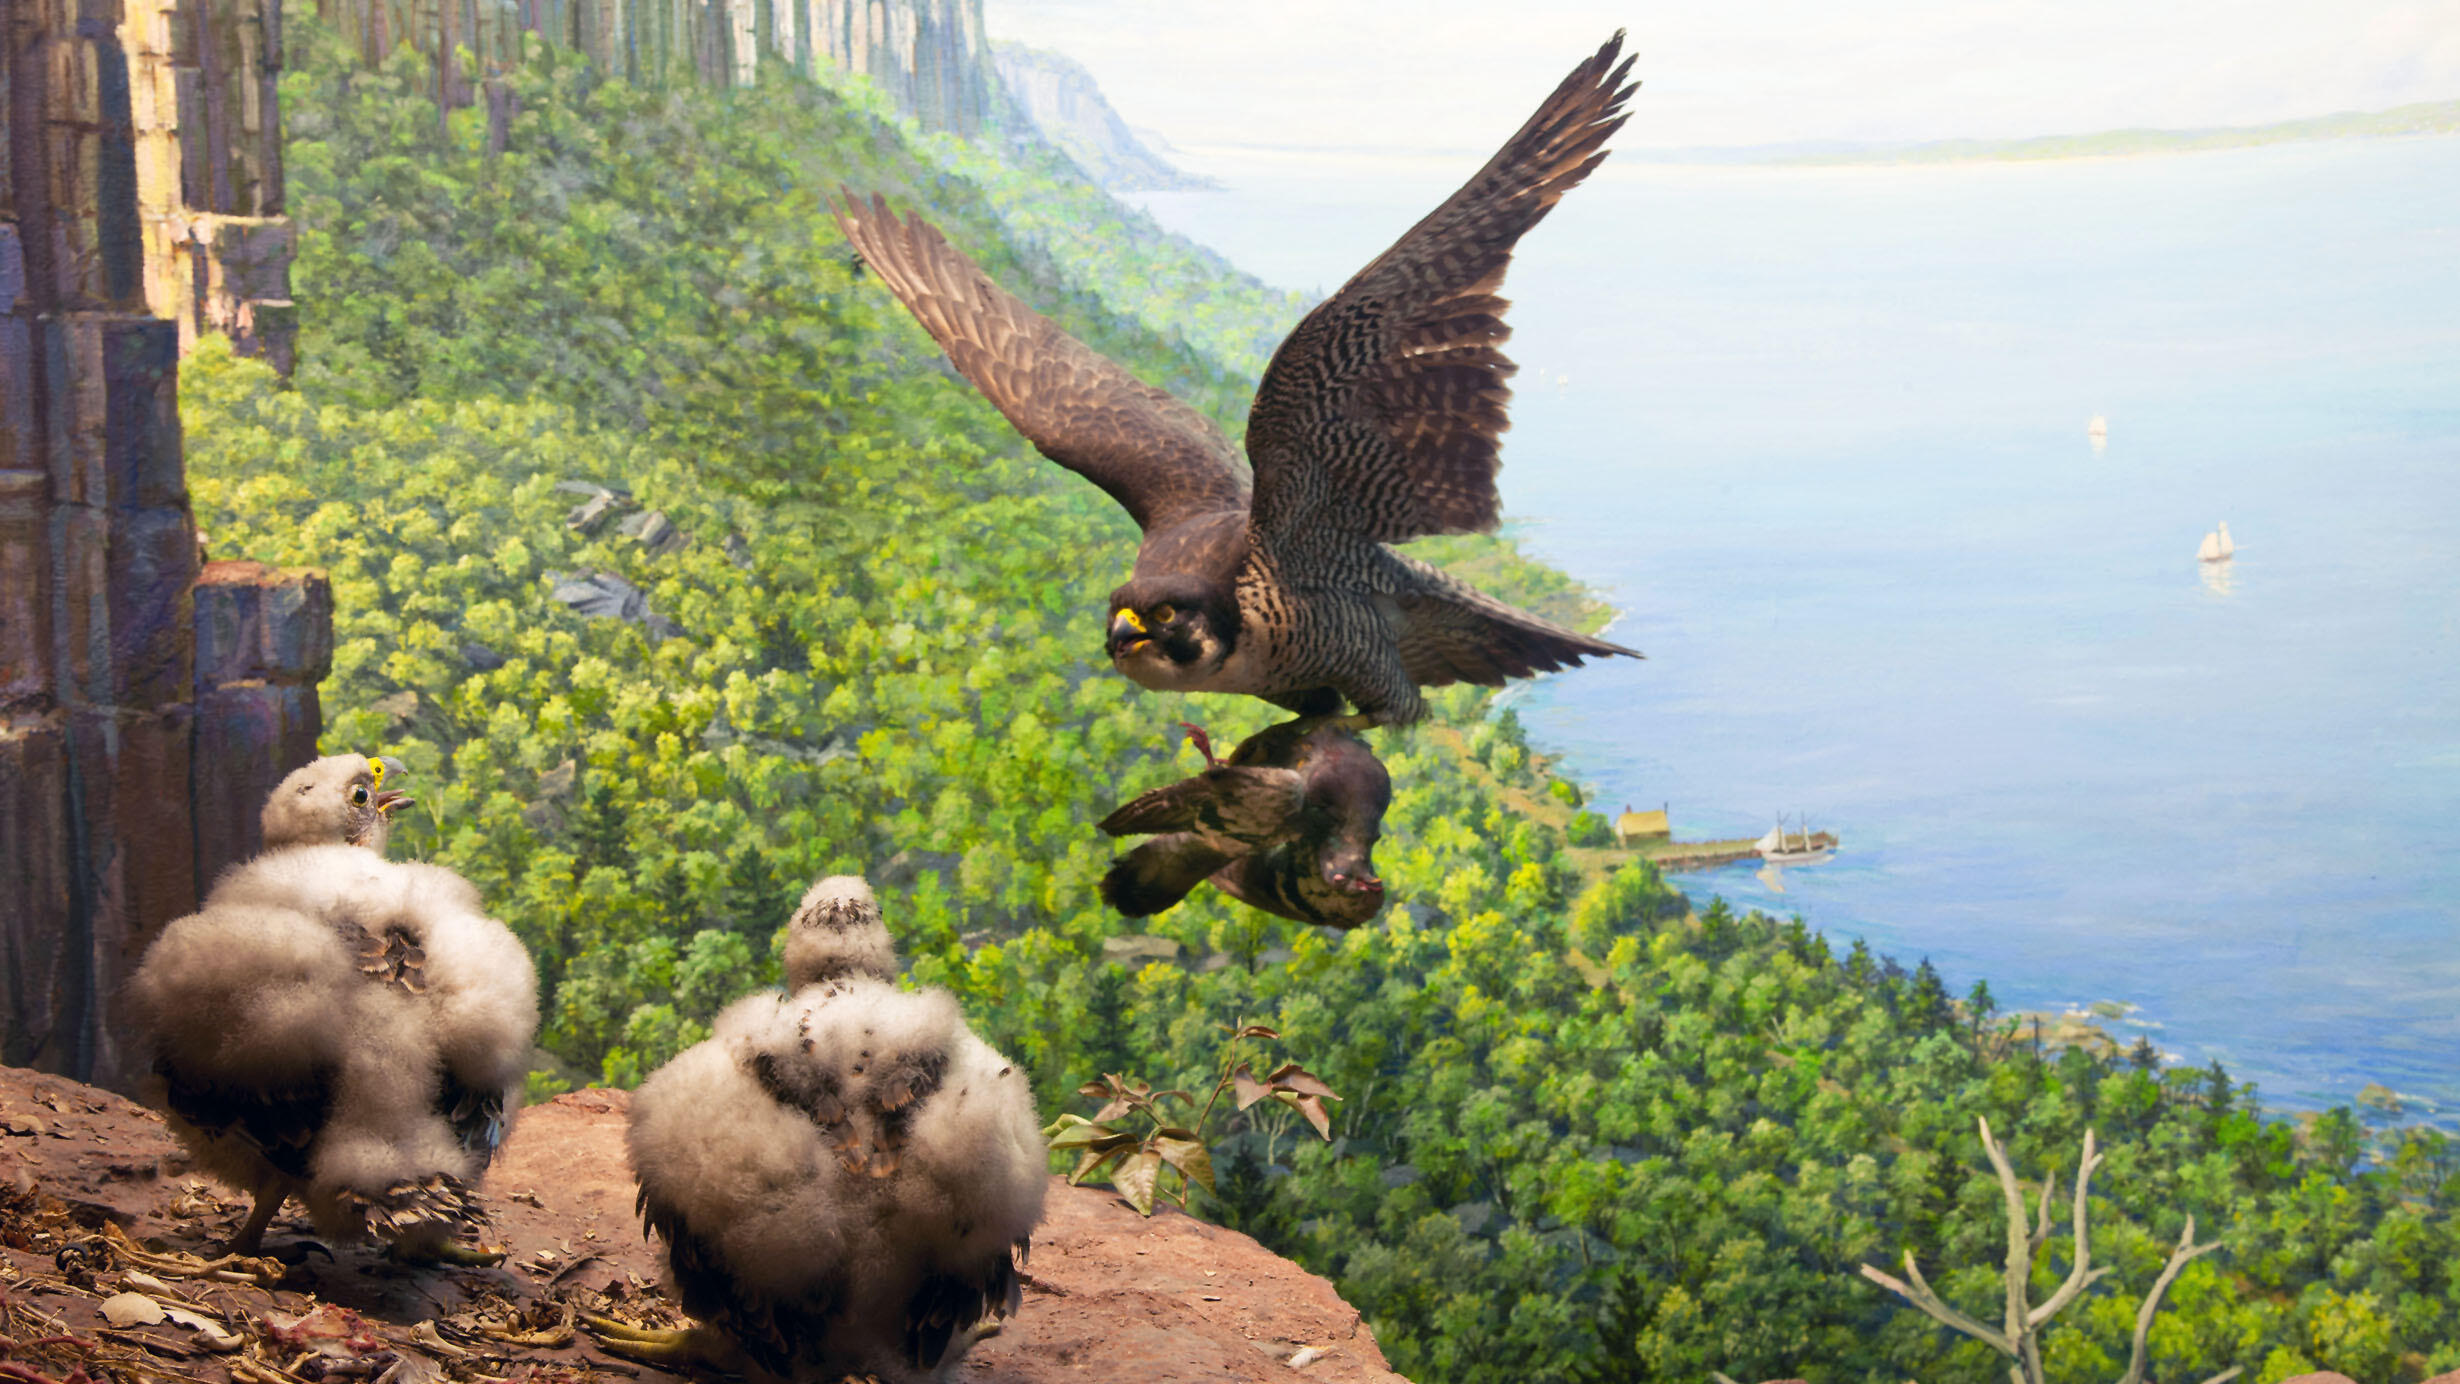 Peregrine Falcon flies over a canyon with a bird clutched in its talons to feed its hatchlings.